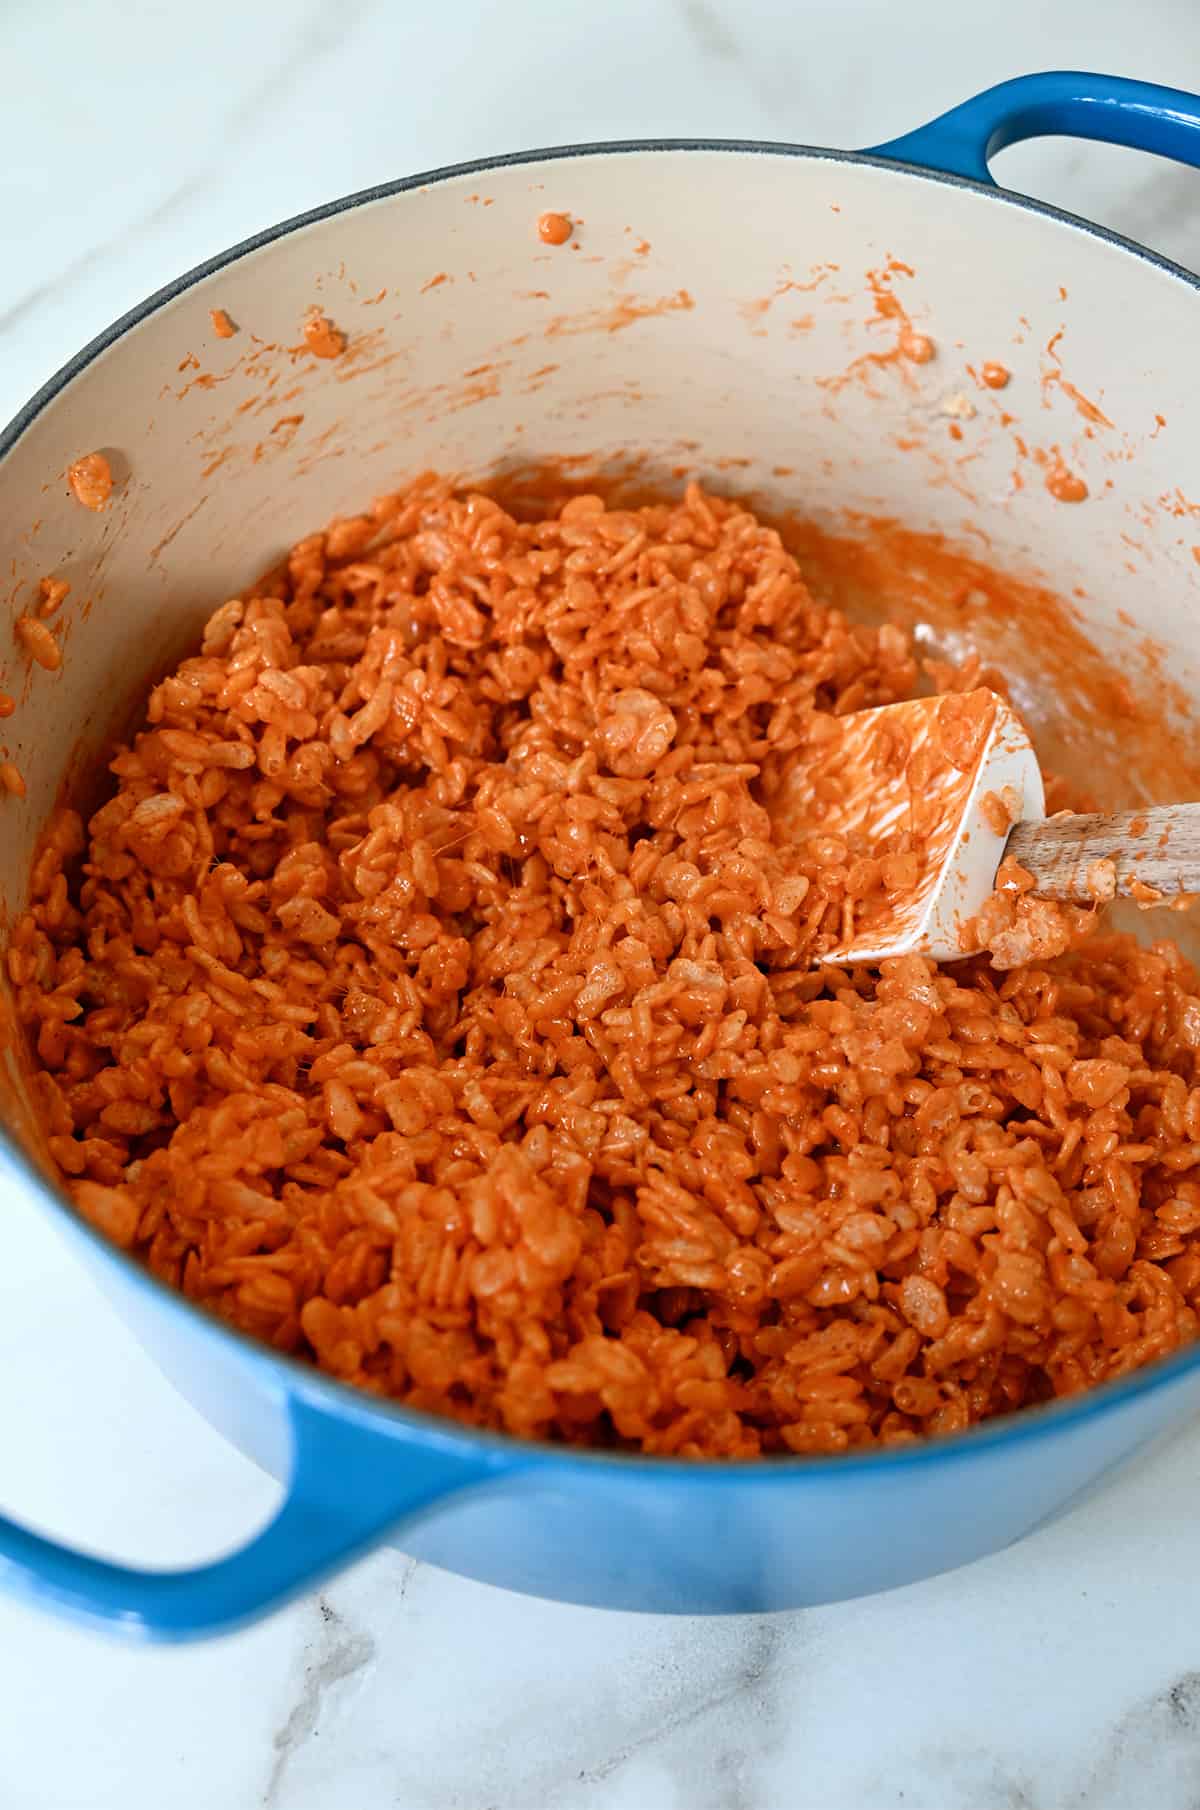 A large stockpot containing orange-colored Rice Krispies and a spatula.